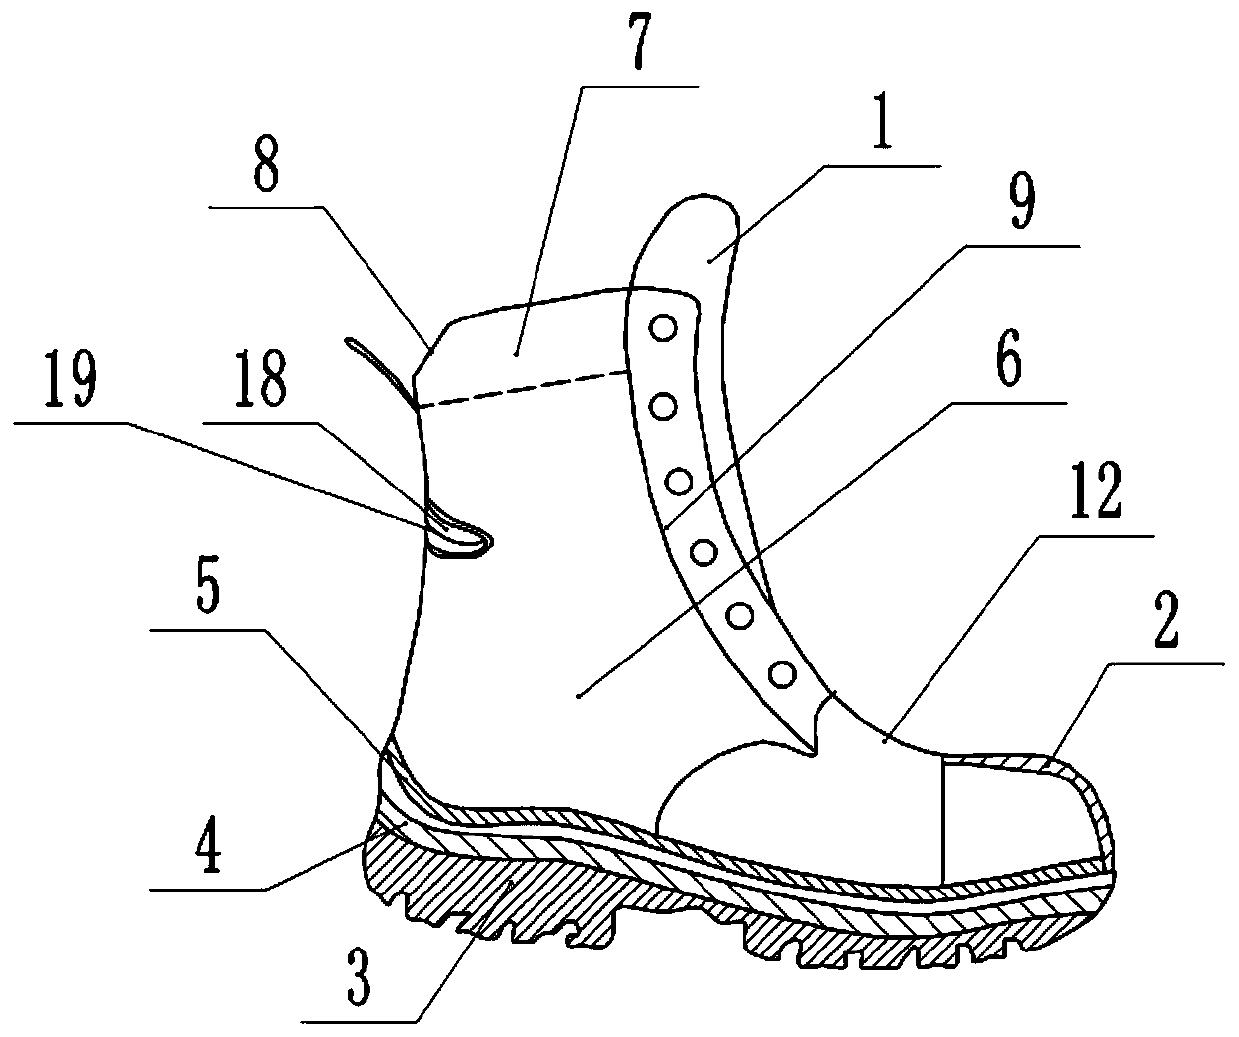 Rescue shoe with multiple protective functions